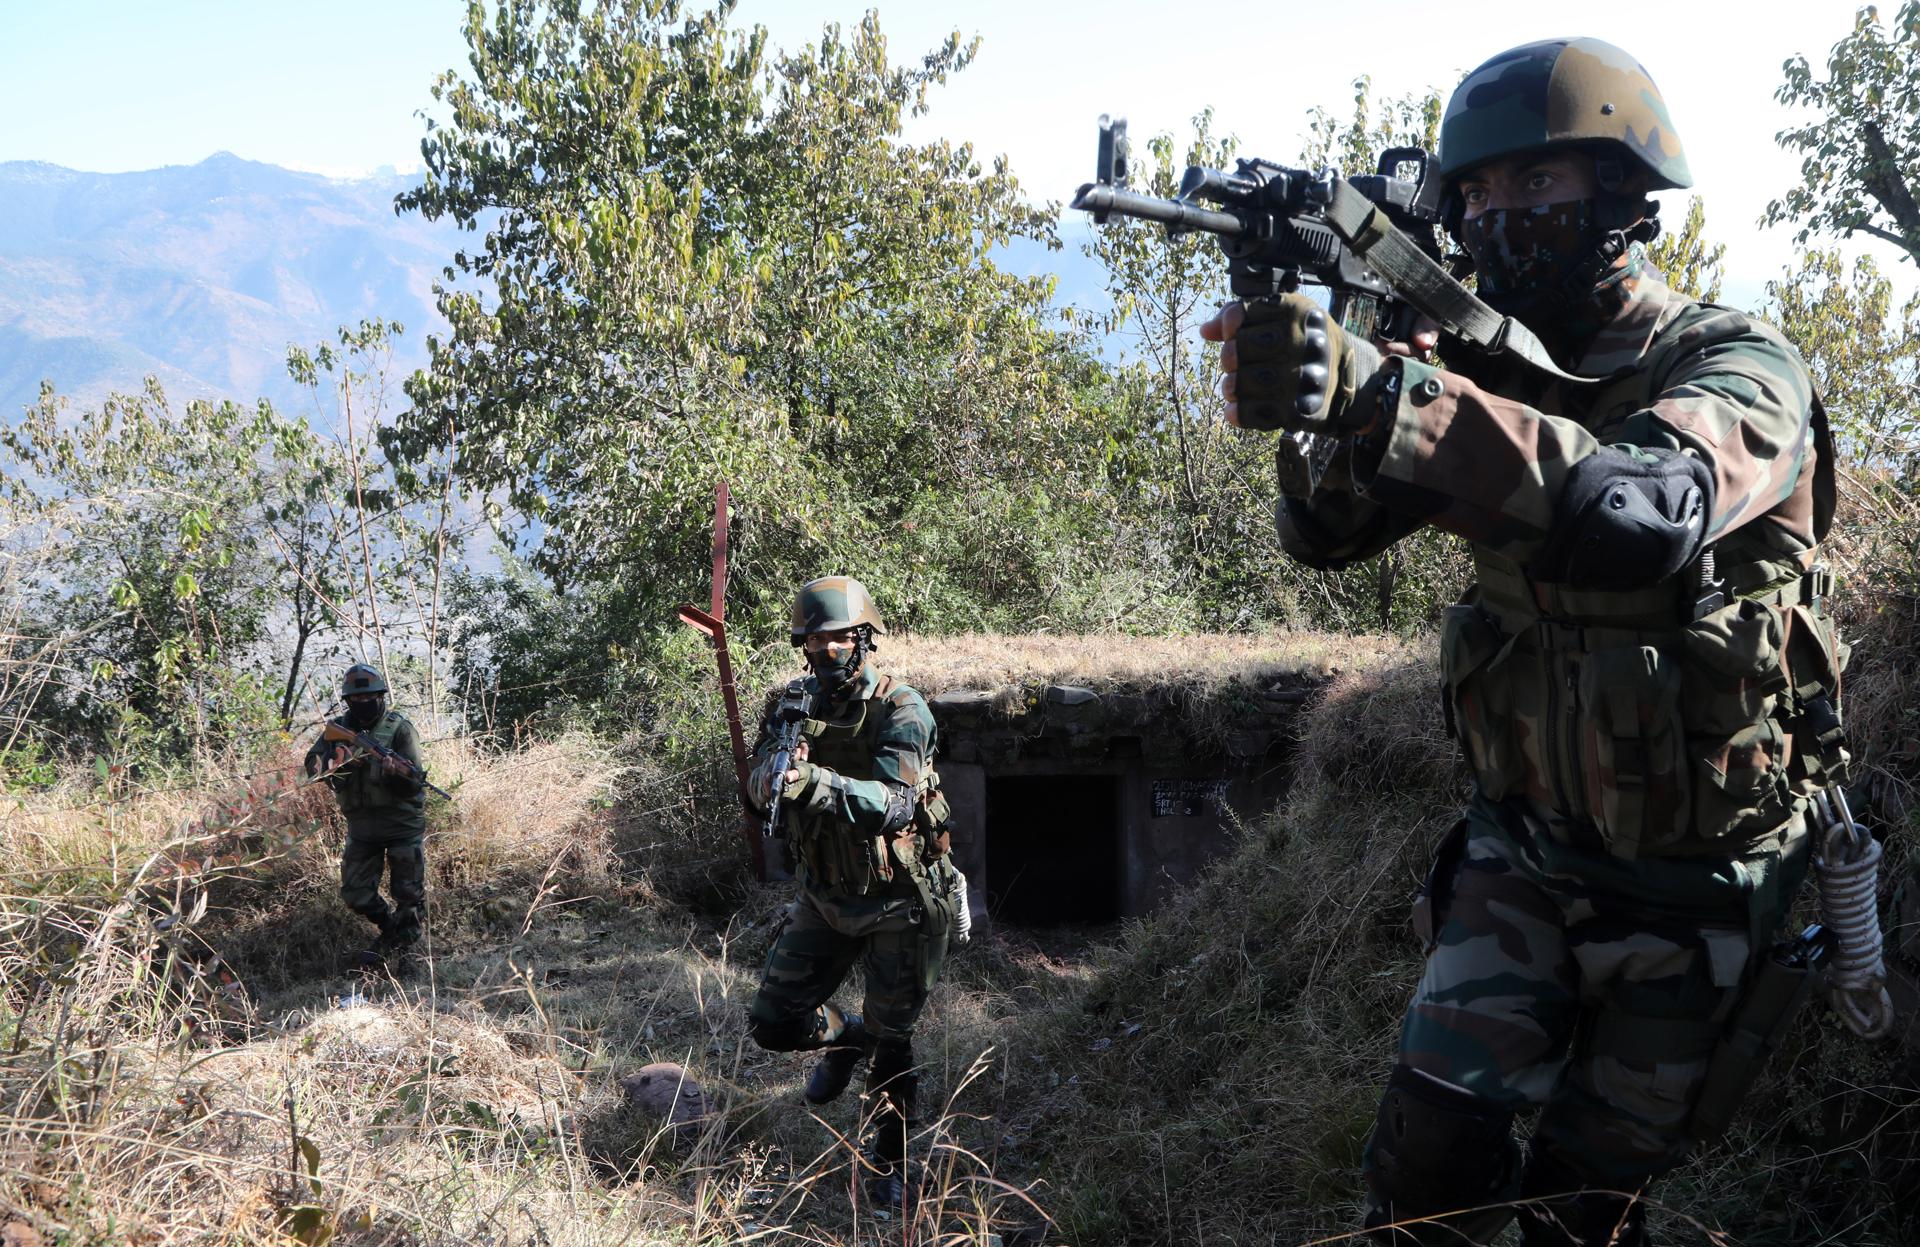 Indian Army soldiers patrol along the border fence at India-Pakistan Line of Control (LoC) on the forward post of Poonch district about 250 KM from Jammu, India, 16 December 2020 (issued 19 December 2020). EFE-EPA FILE/JAIPAL SINGH